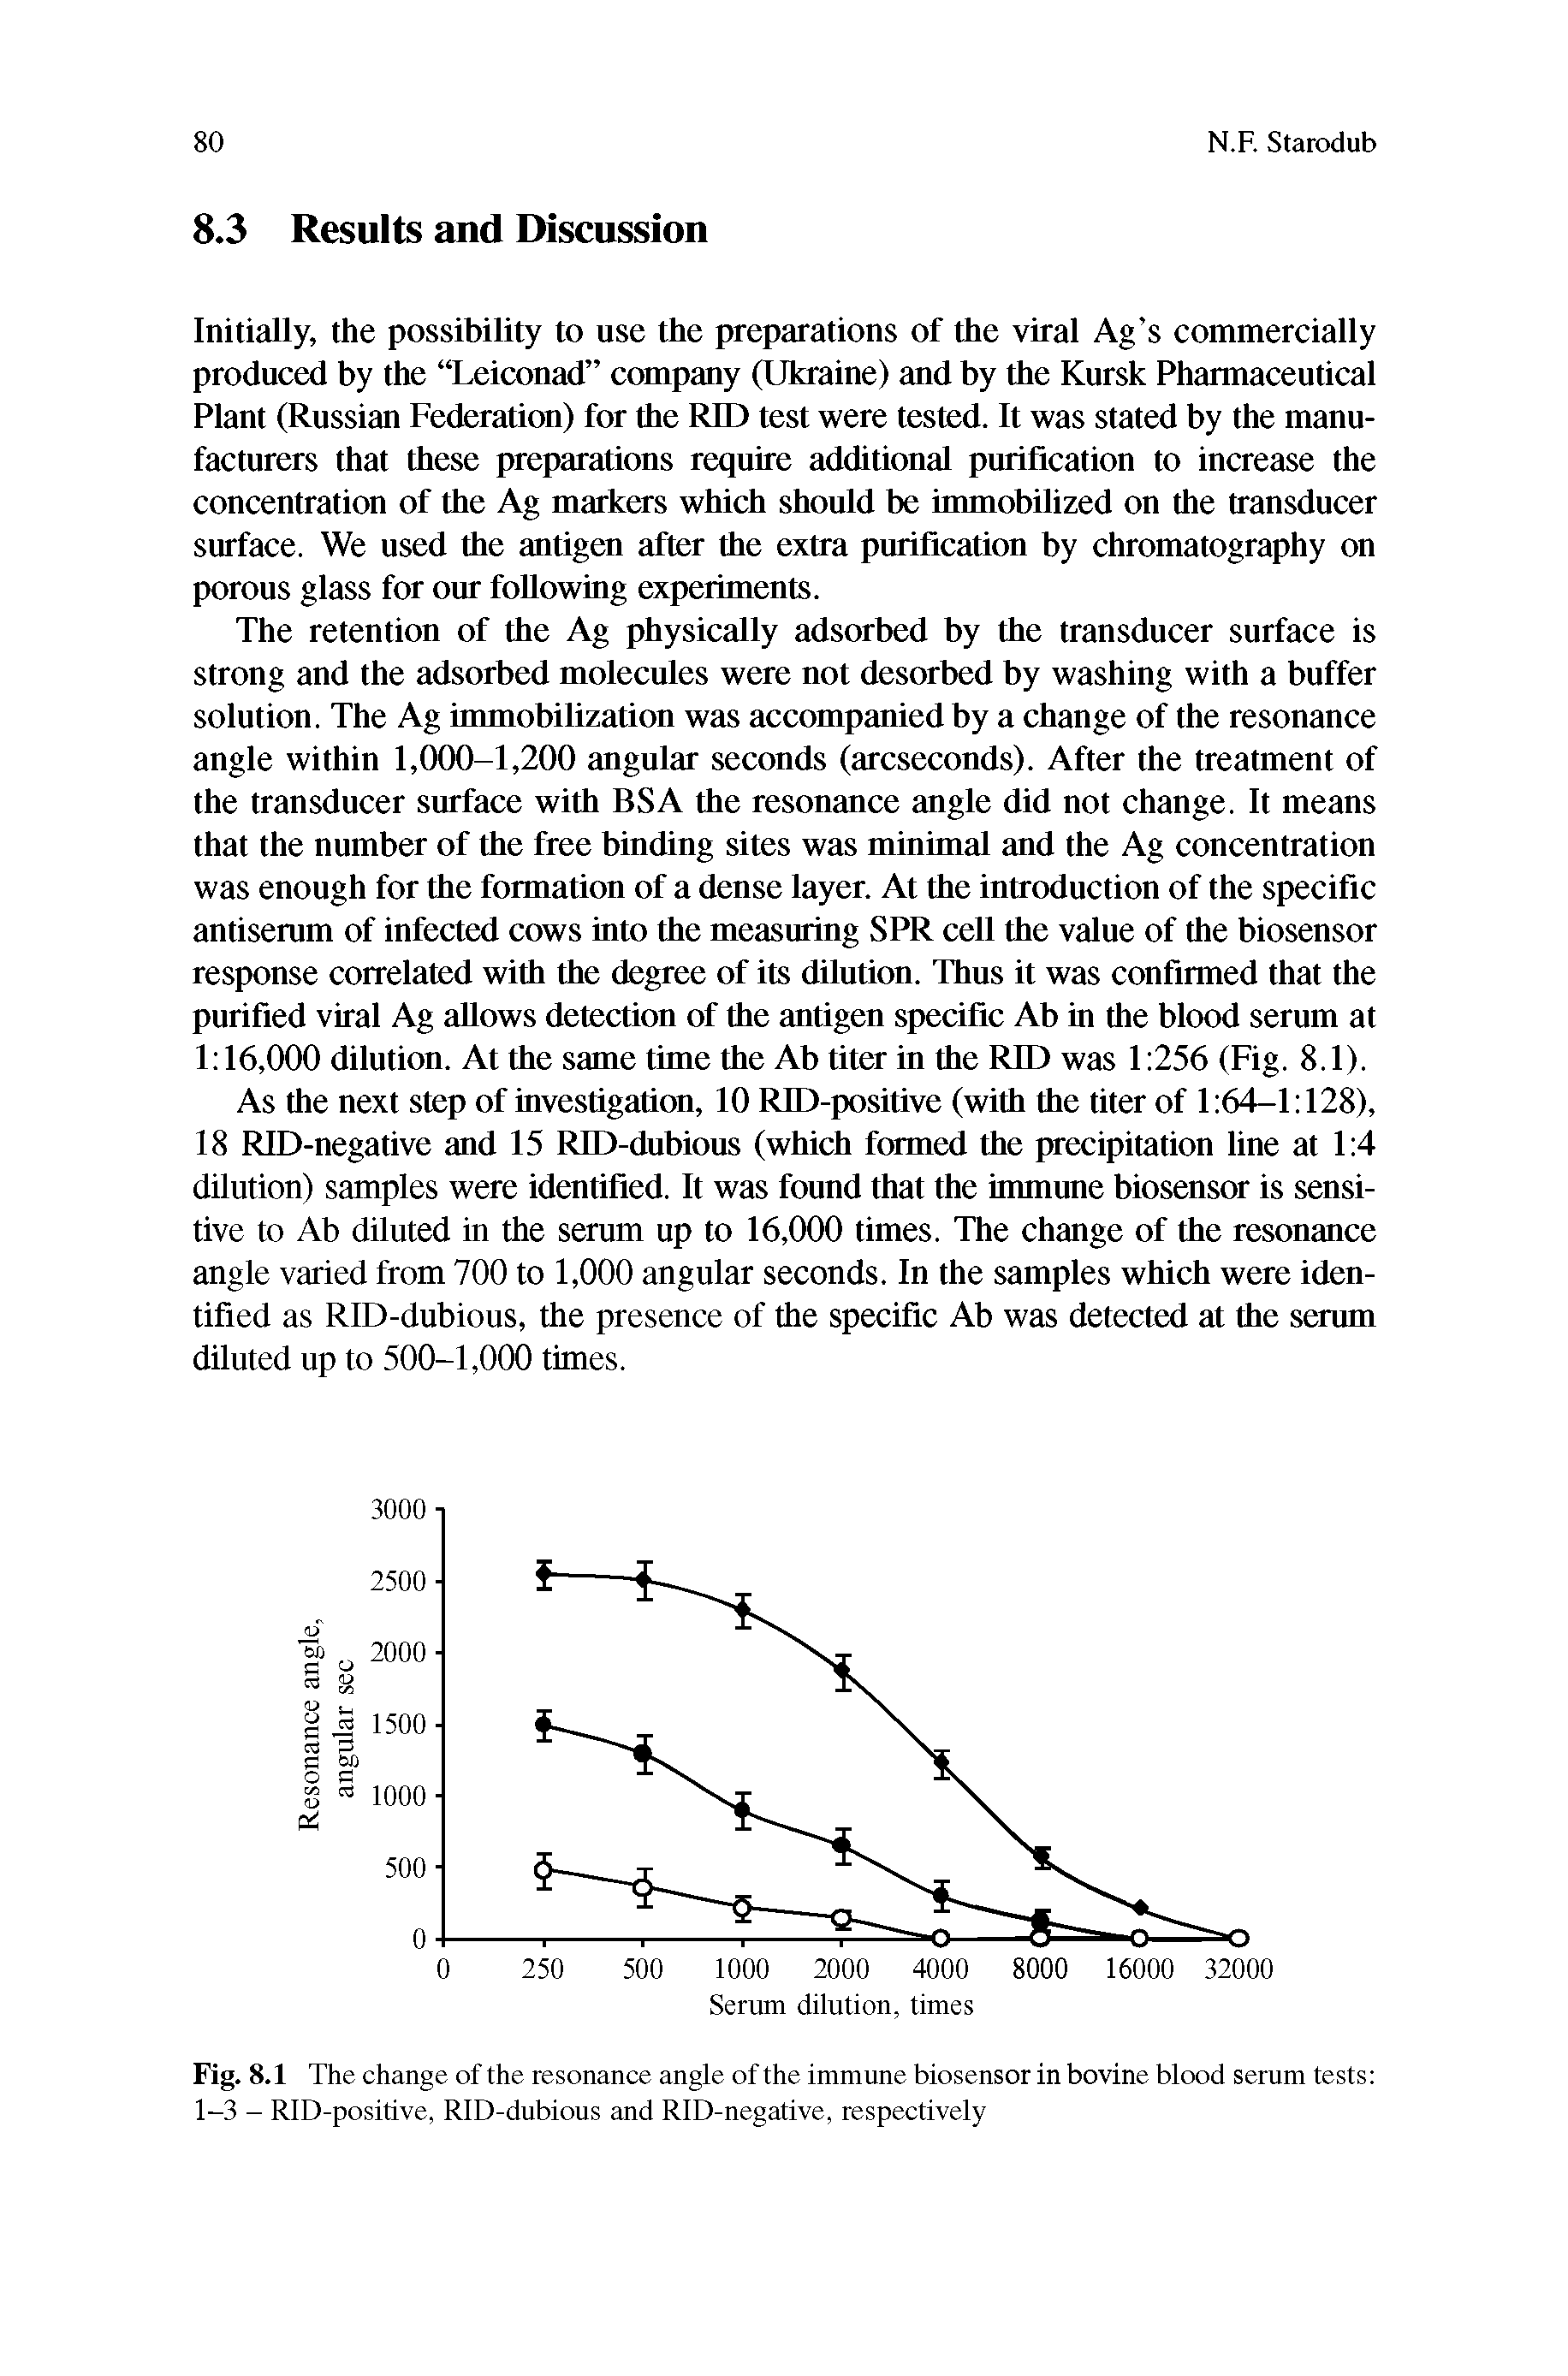 Fig. 8.1 The change of the resonance angle of the immune biosensor in bovine blood serum tests 1-3 - RID-positive, RID-dubious and RID-negative, respectively...